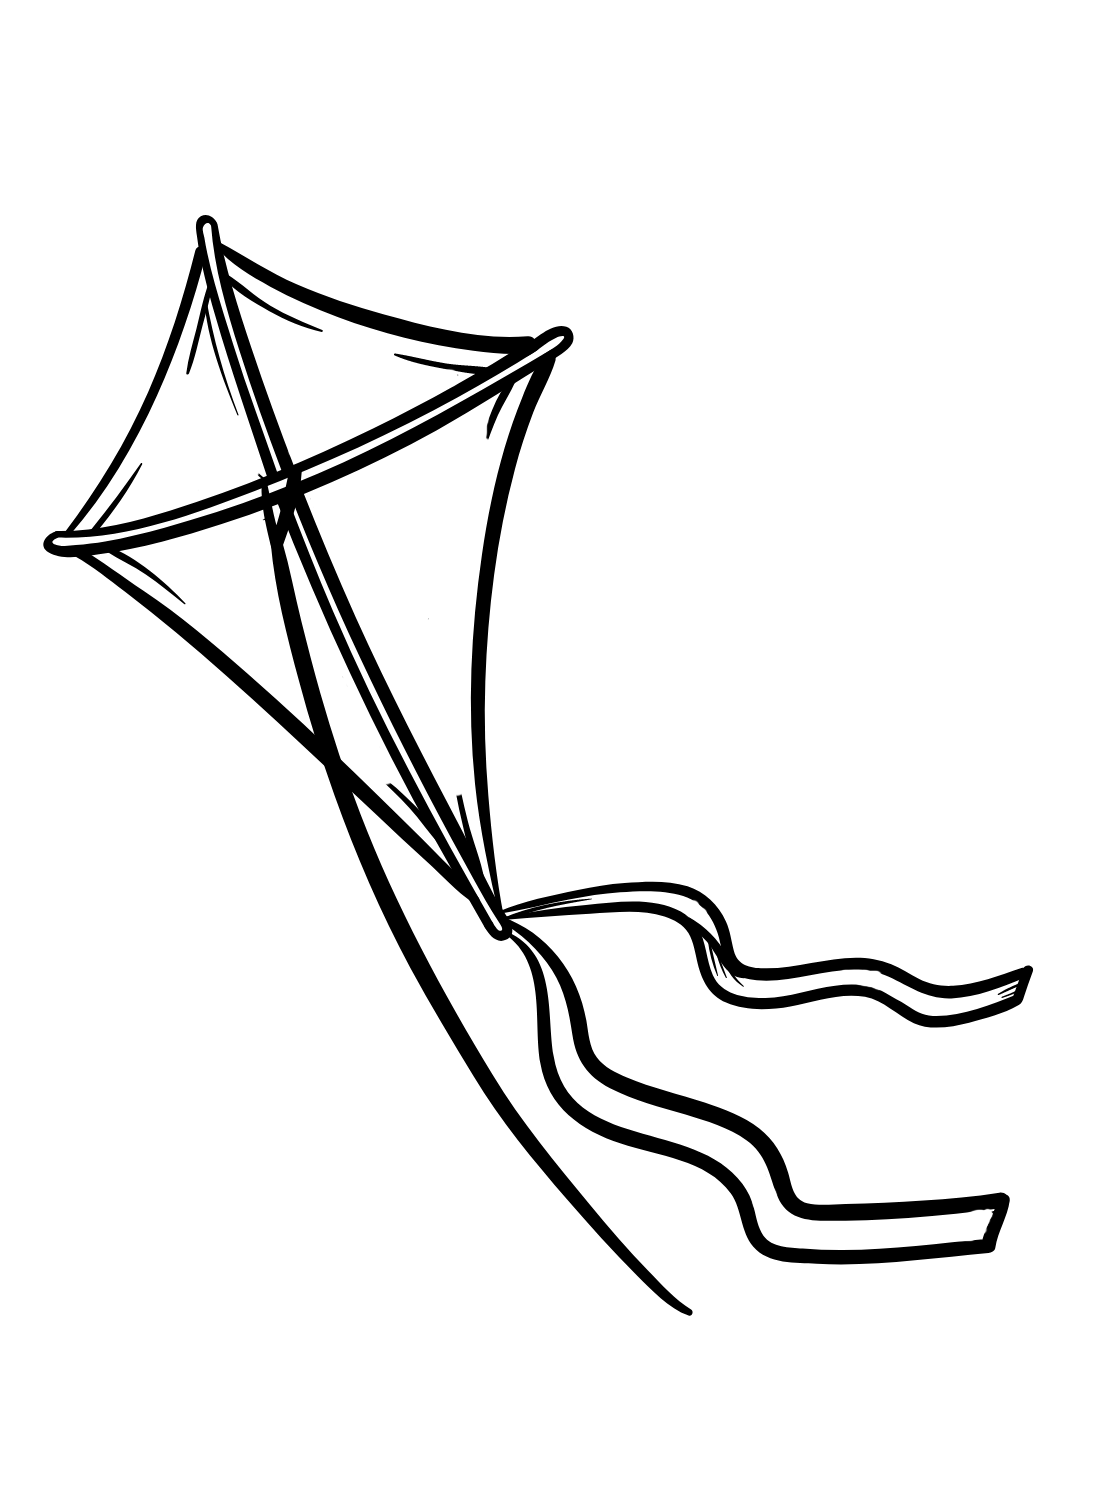 Flying Kite Coloring Page